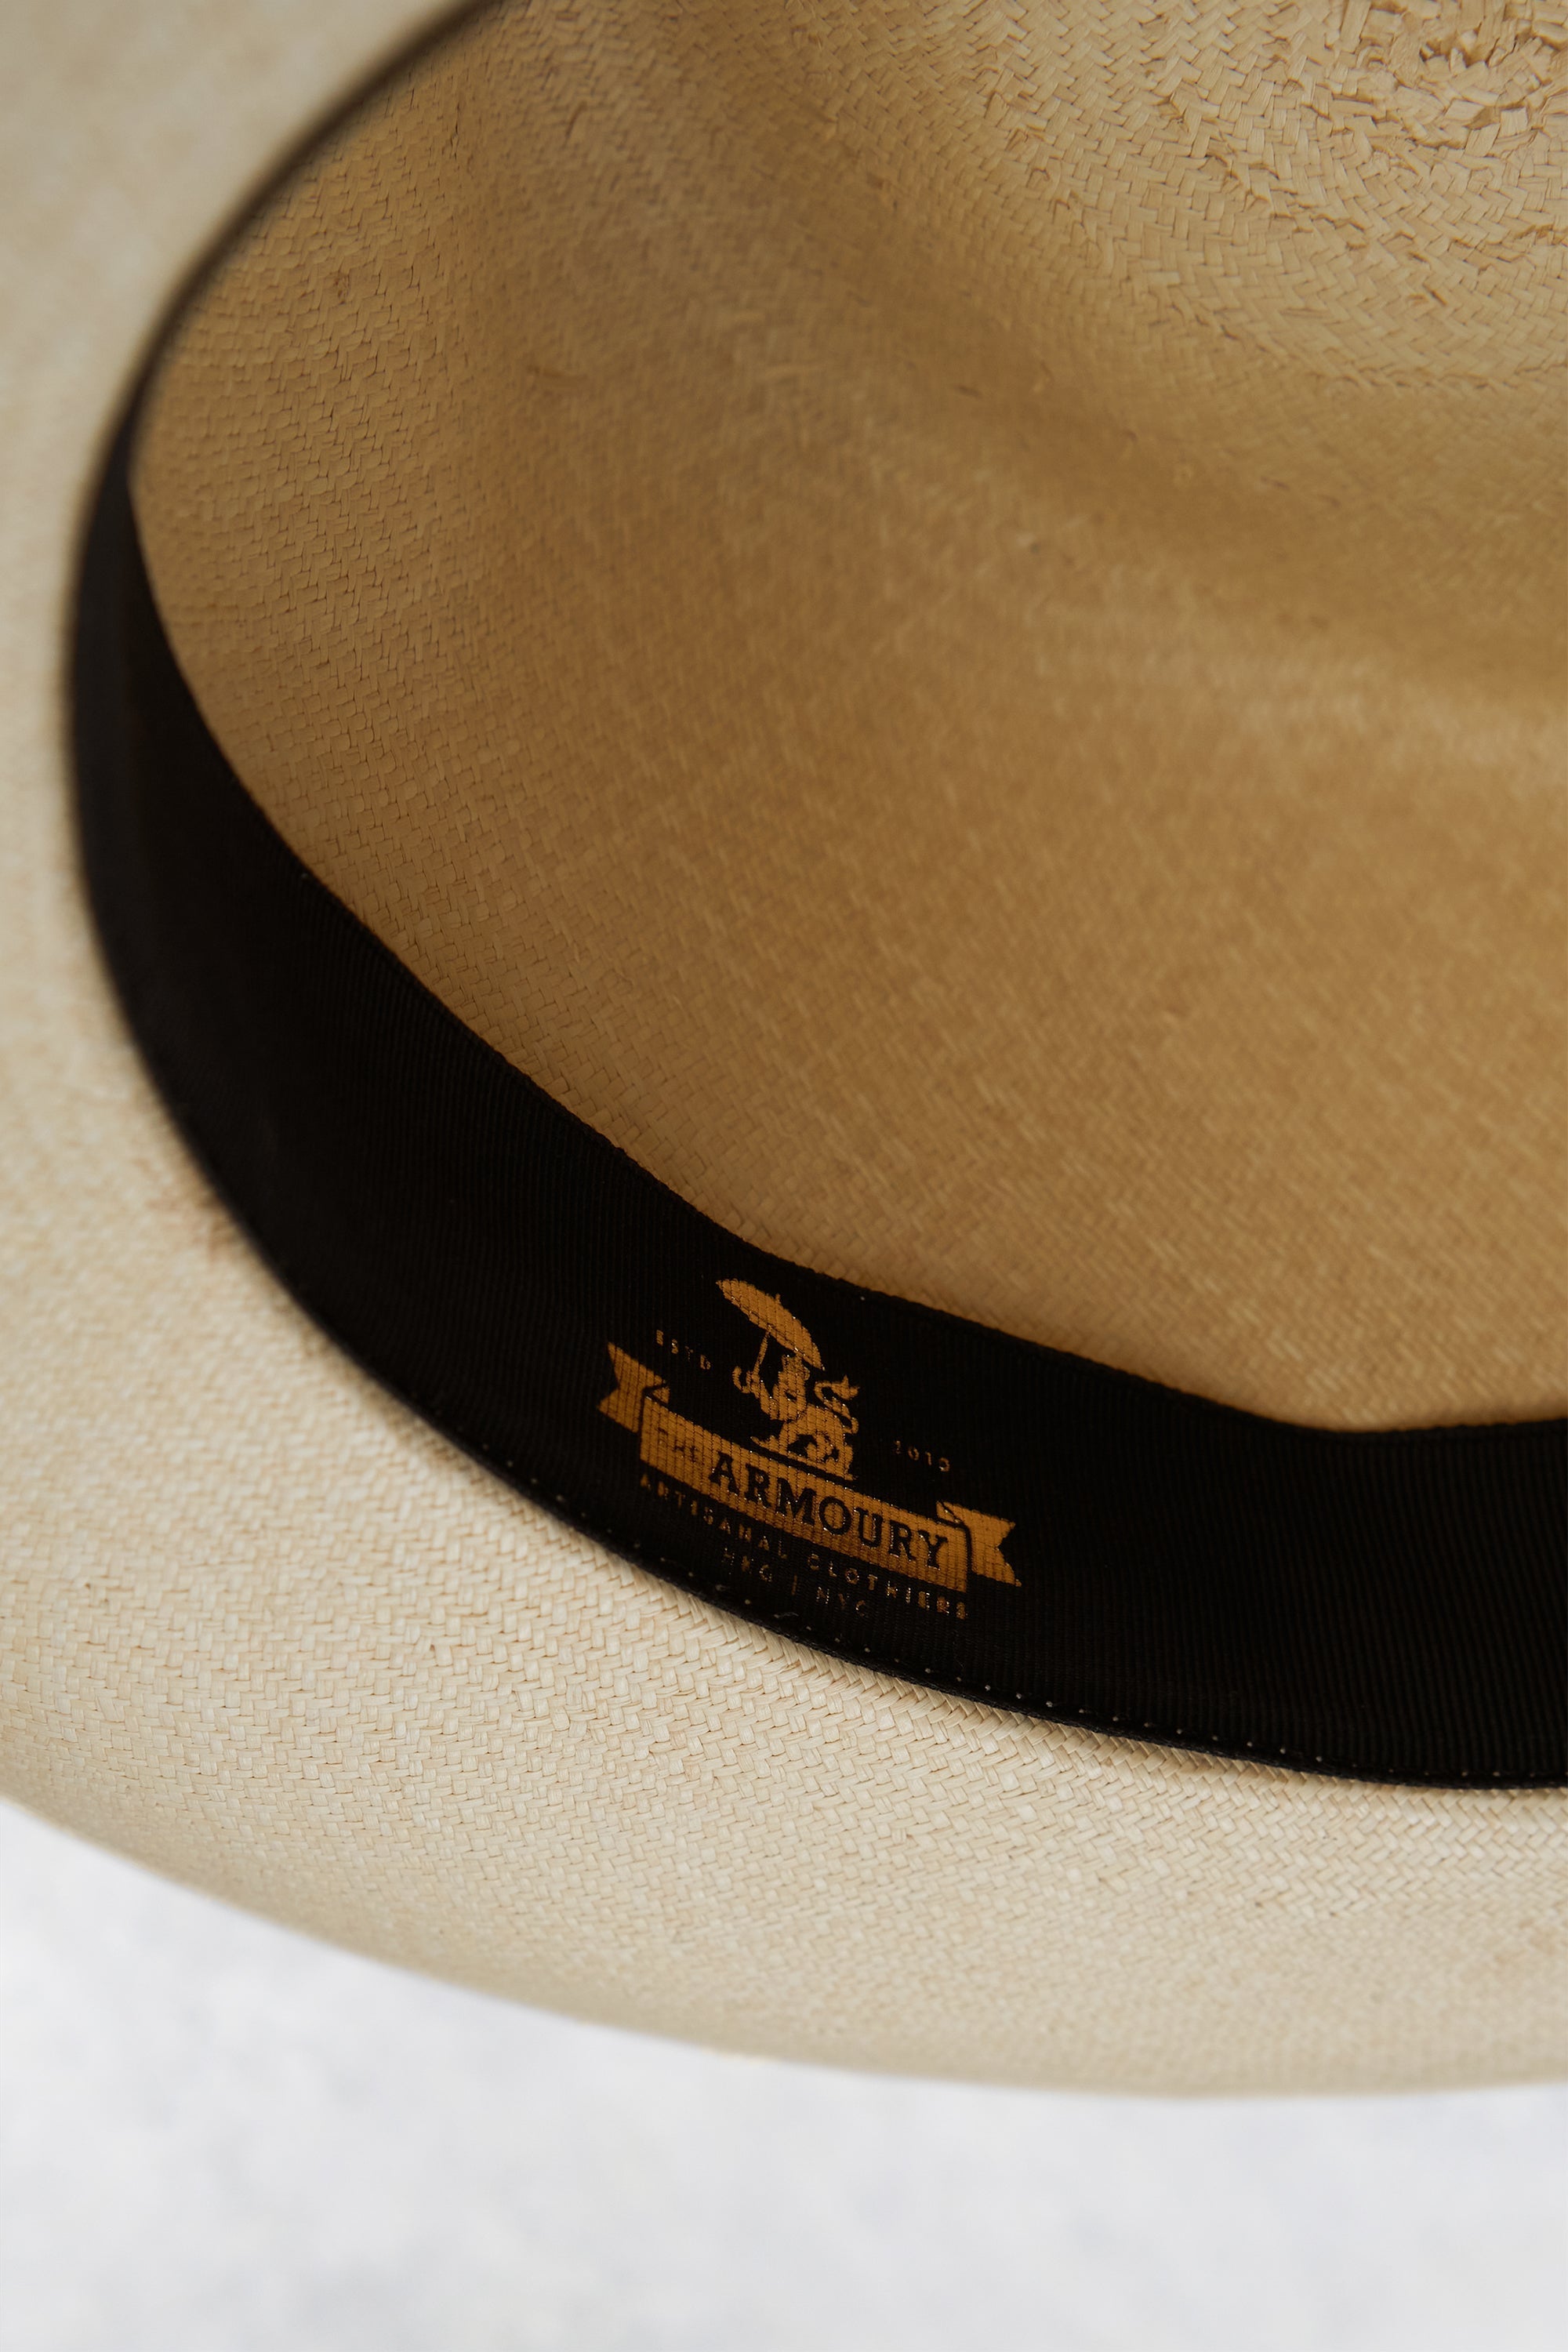 The Armoury Montecristi Panama Hat Old Hood *new with defect *